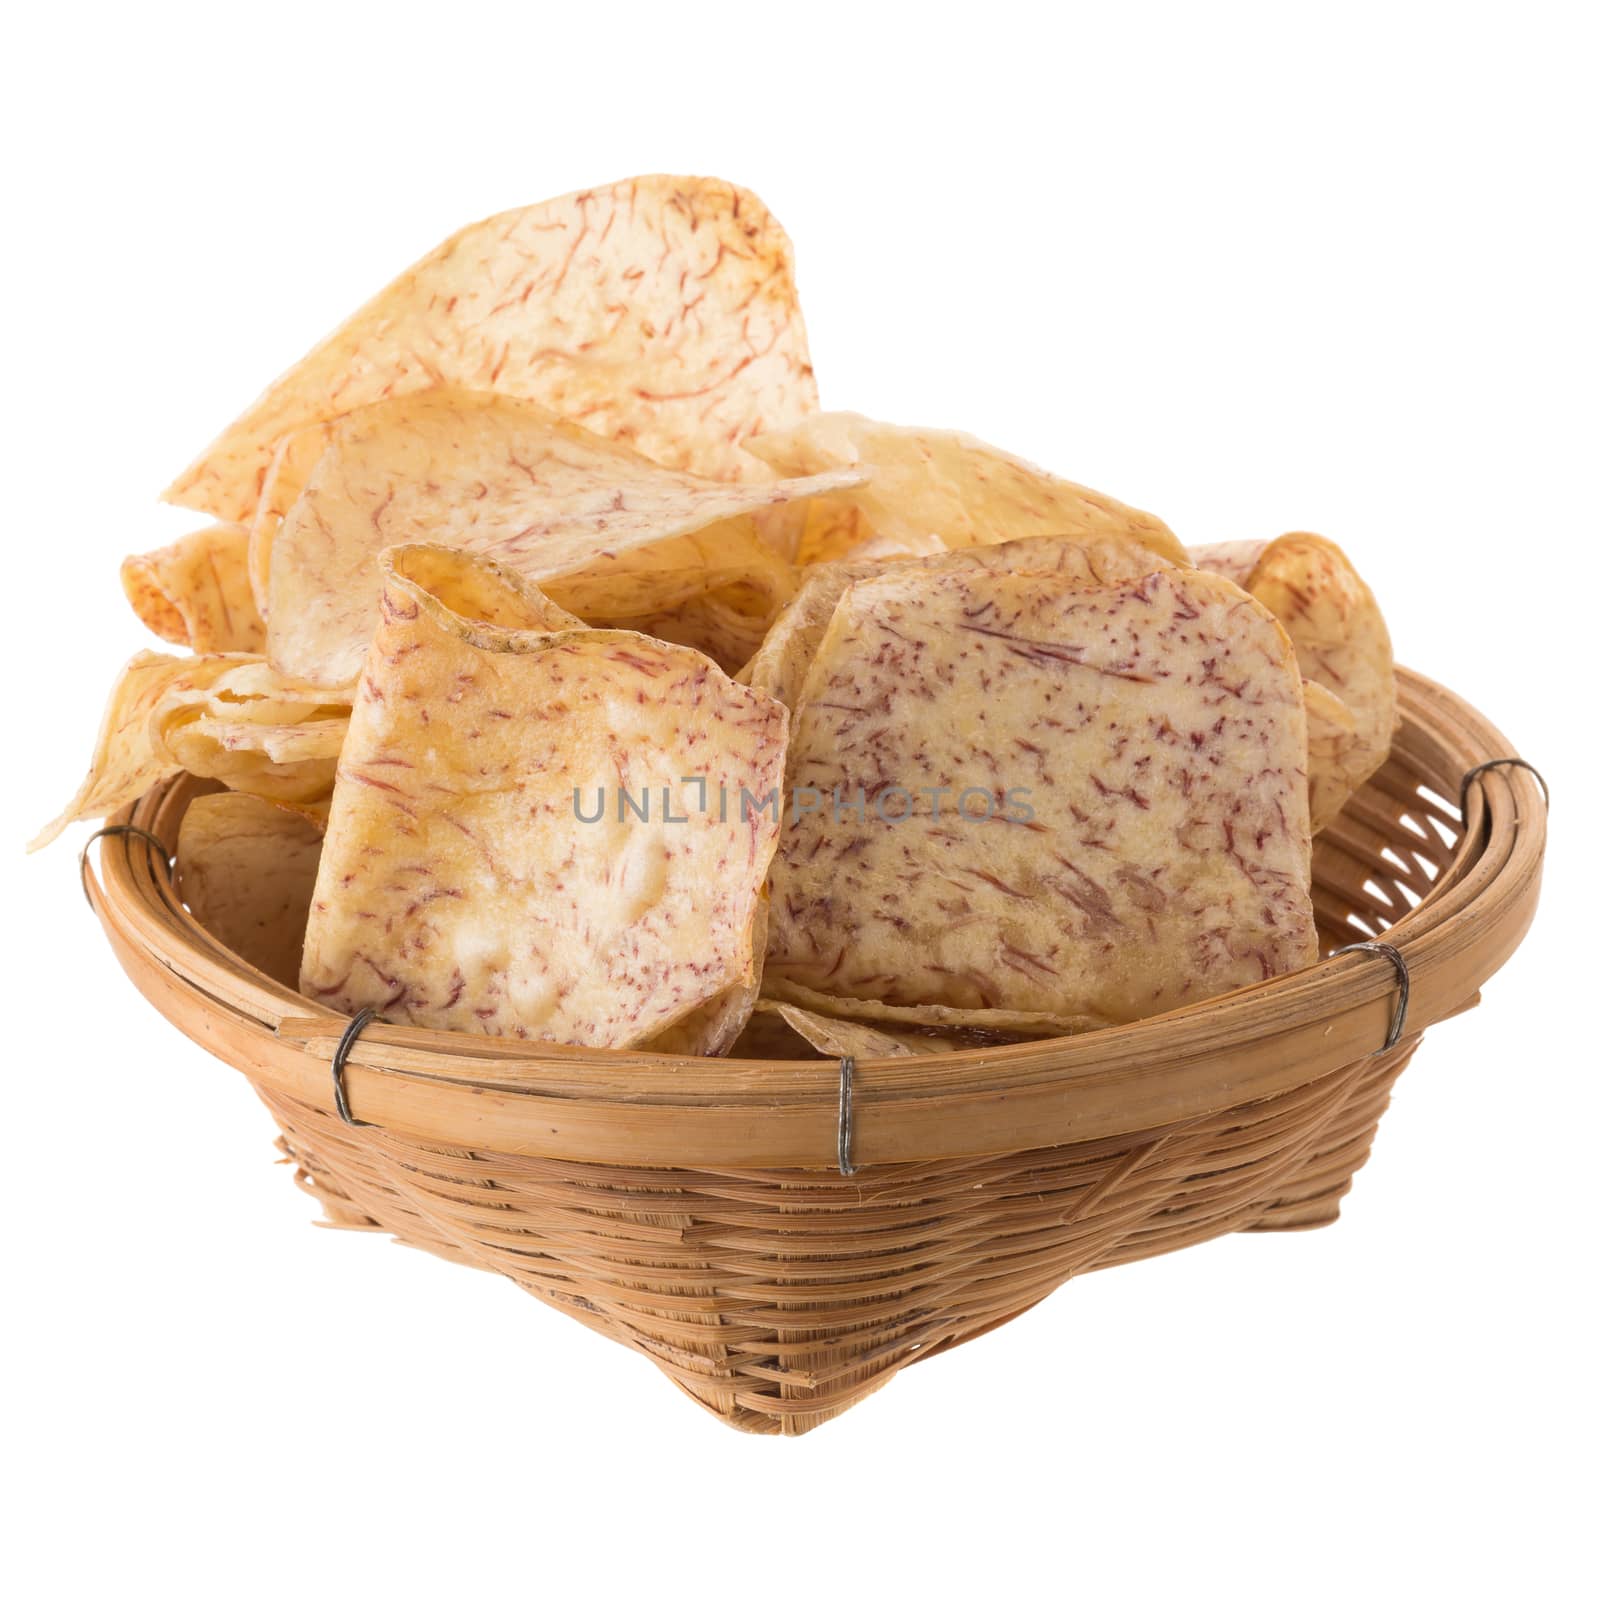 fried Taro slices Dip into the caramel In the basket isolated on white background.